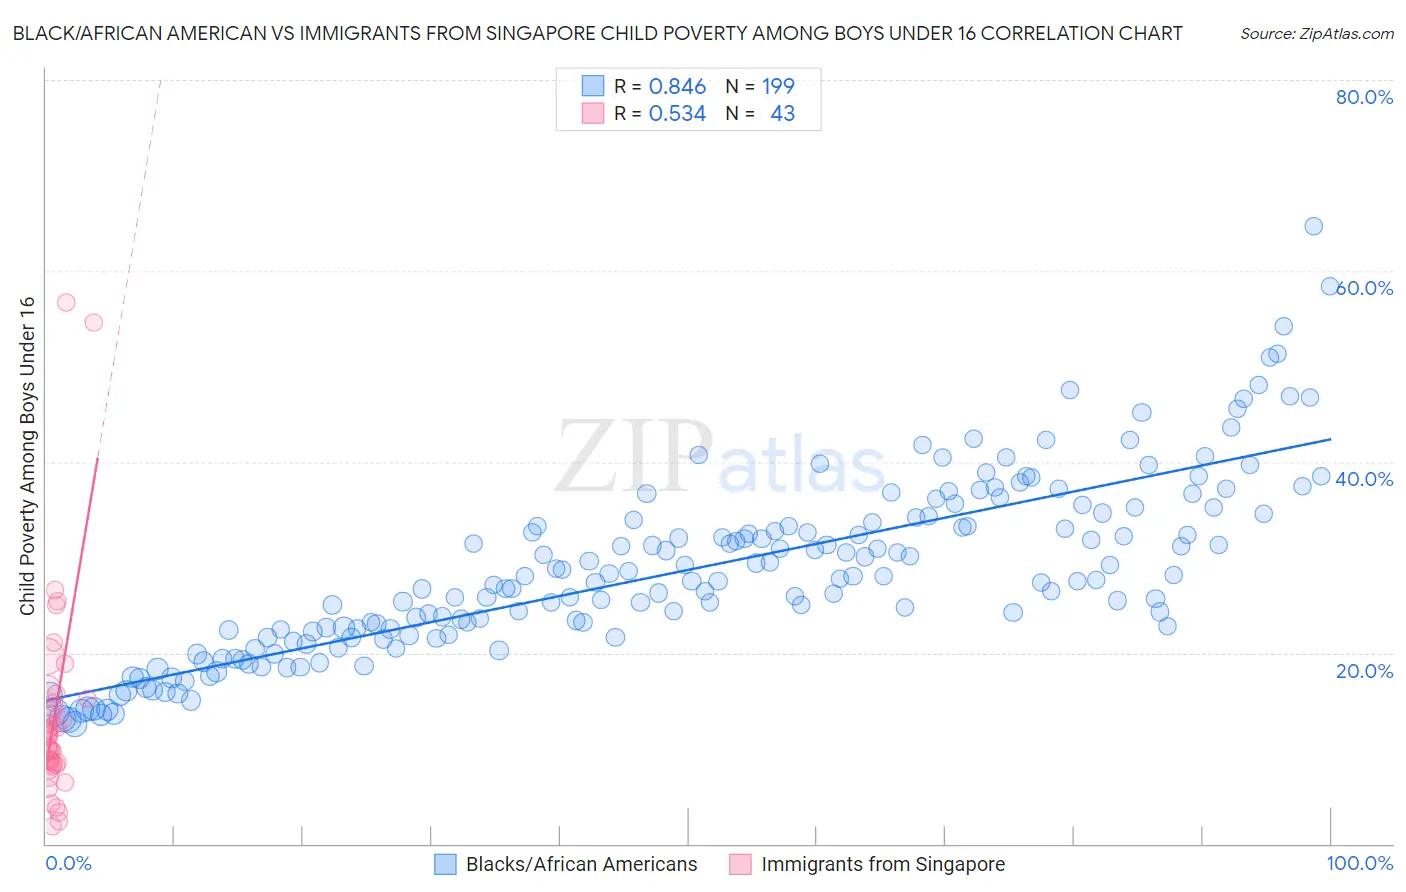 Black/African American vs Immigrants from Singapore Child Poverty Among Boys Under 16